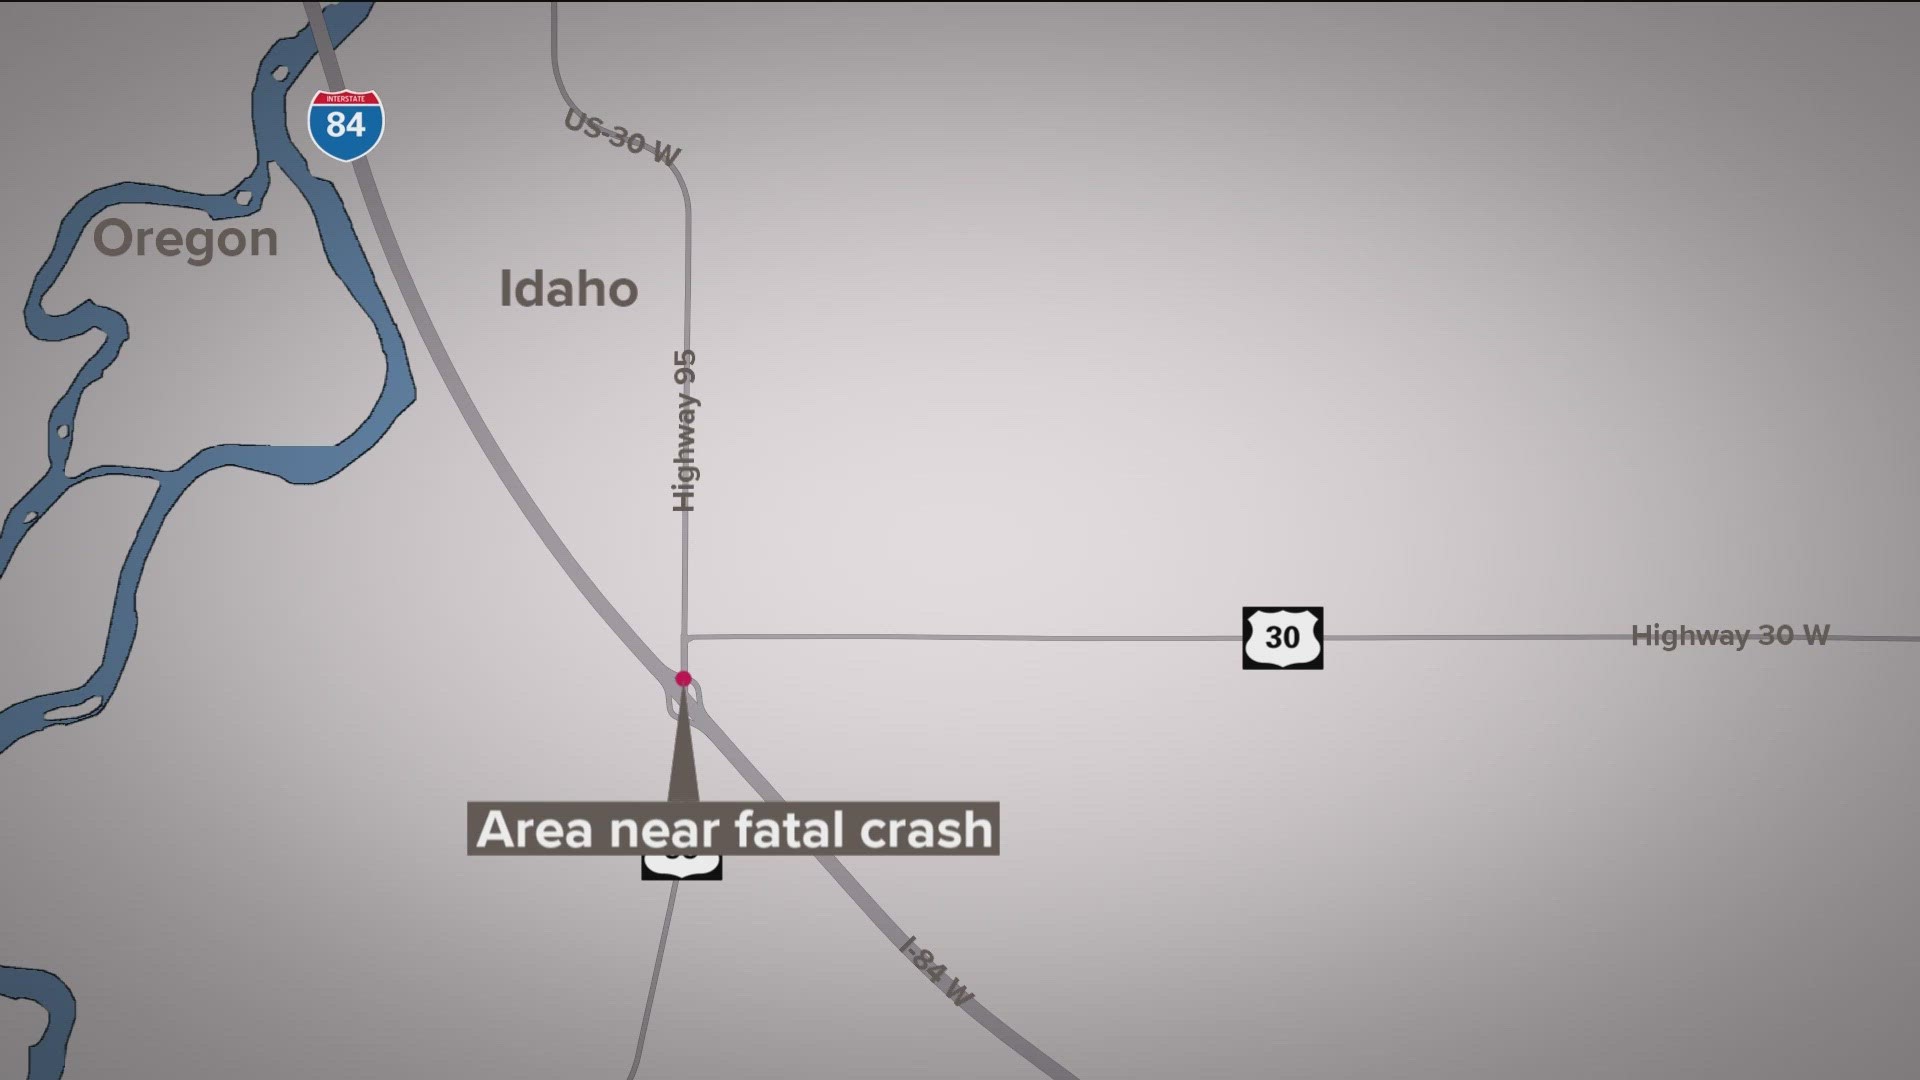 A 38-year-old man from Homedale was pronounced dead at the scene, Idaho State Police said.